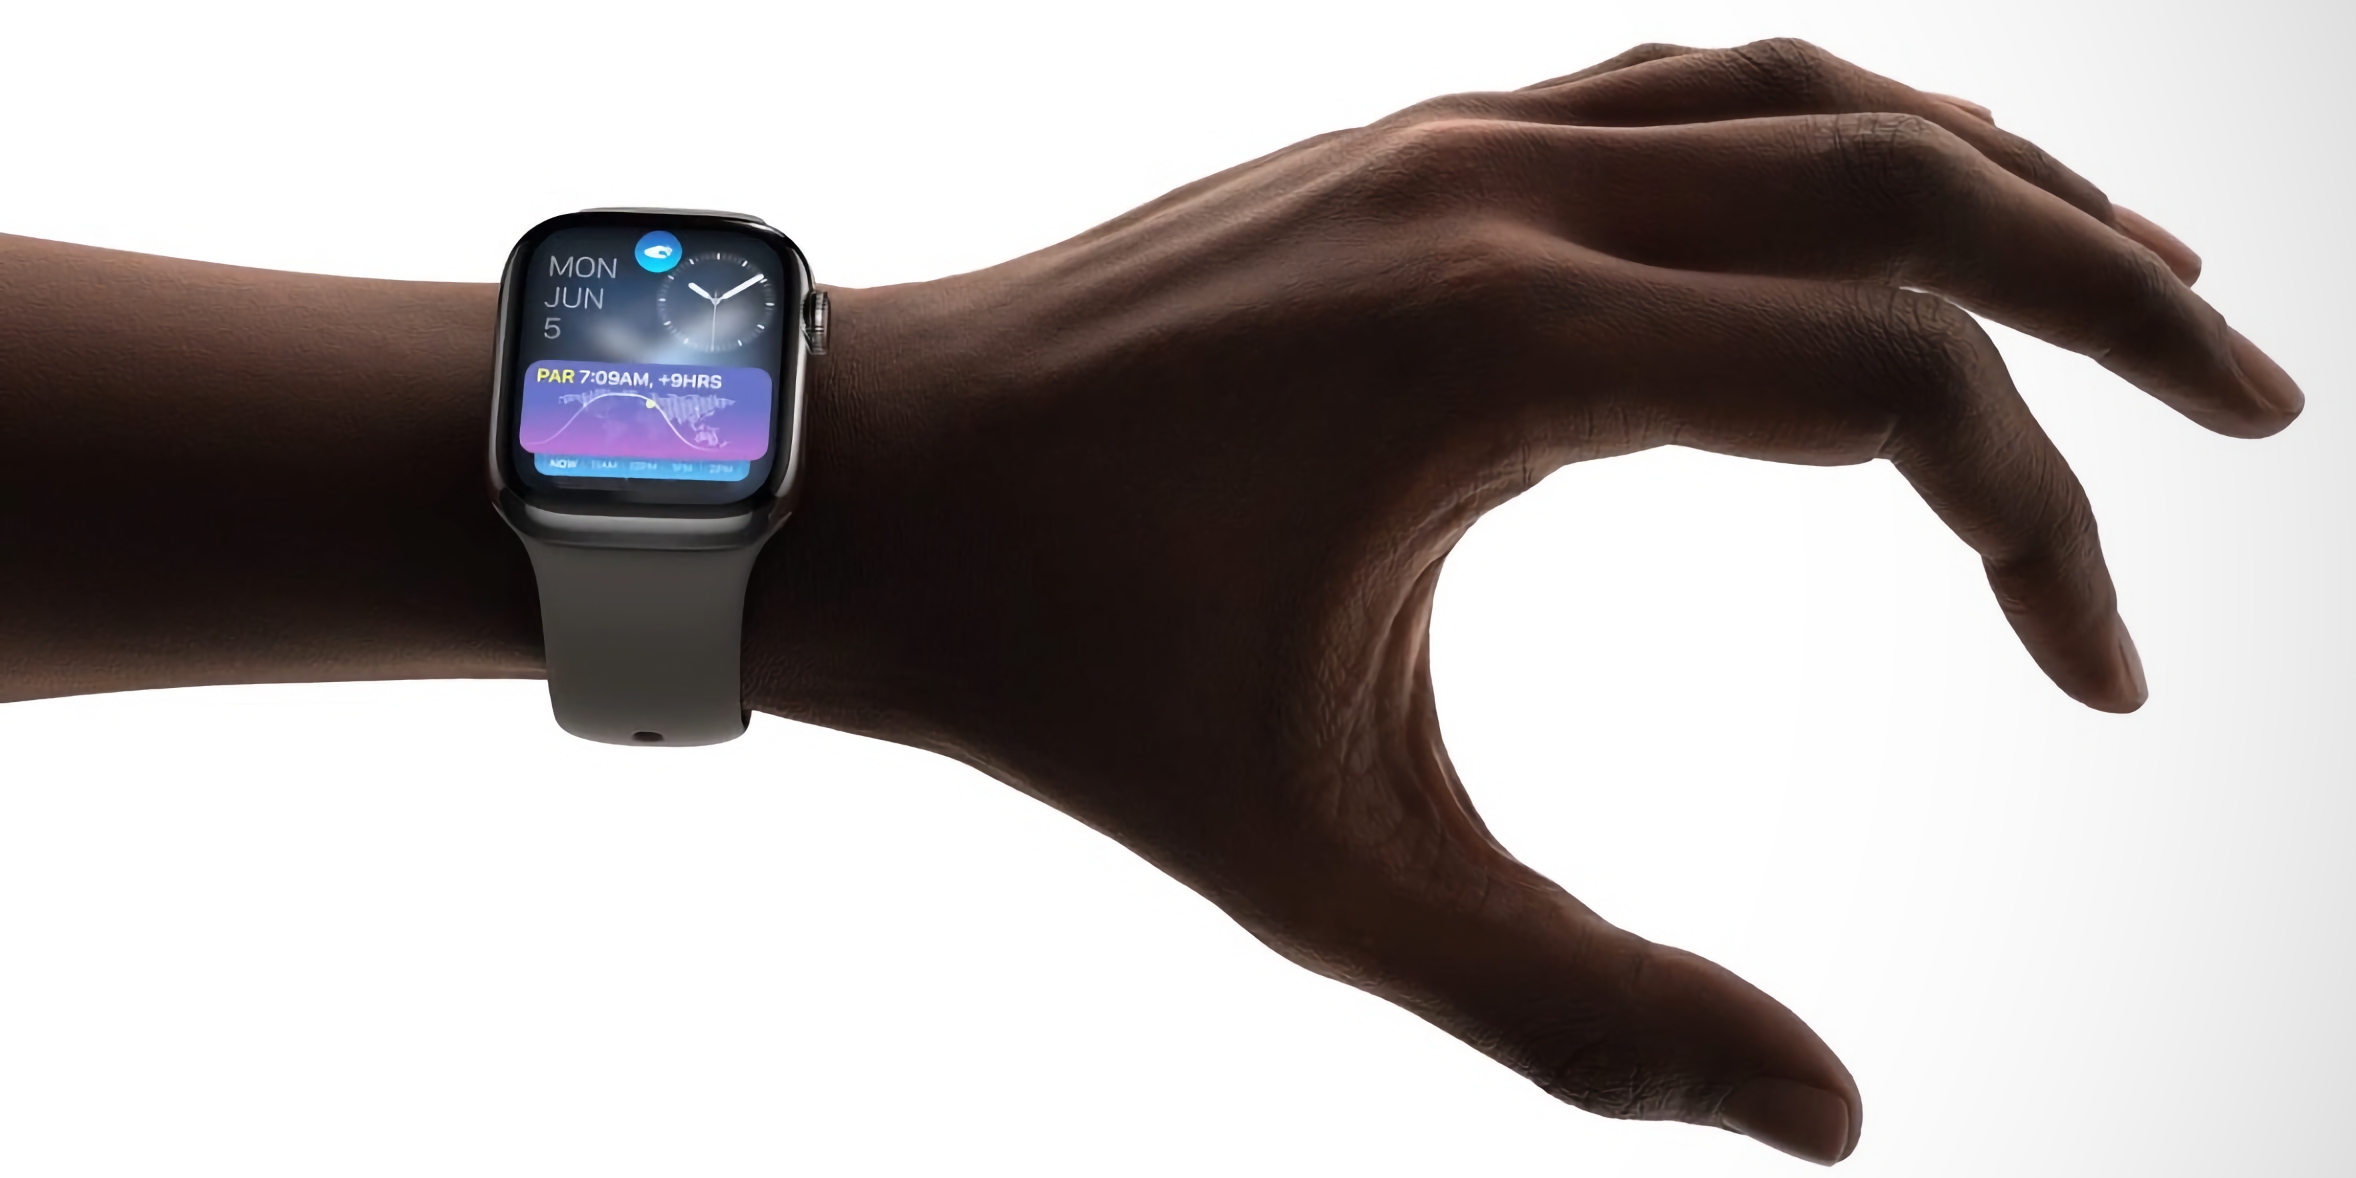 Counterpoint: Double Wristing with a Smartwatch